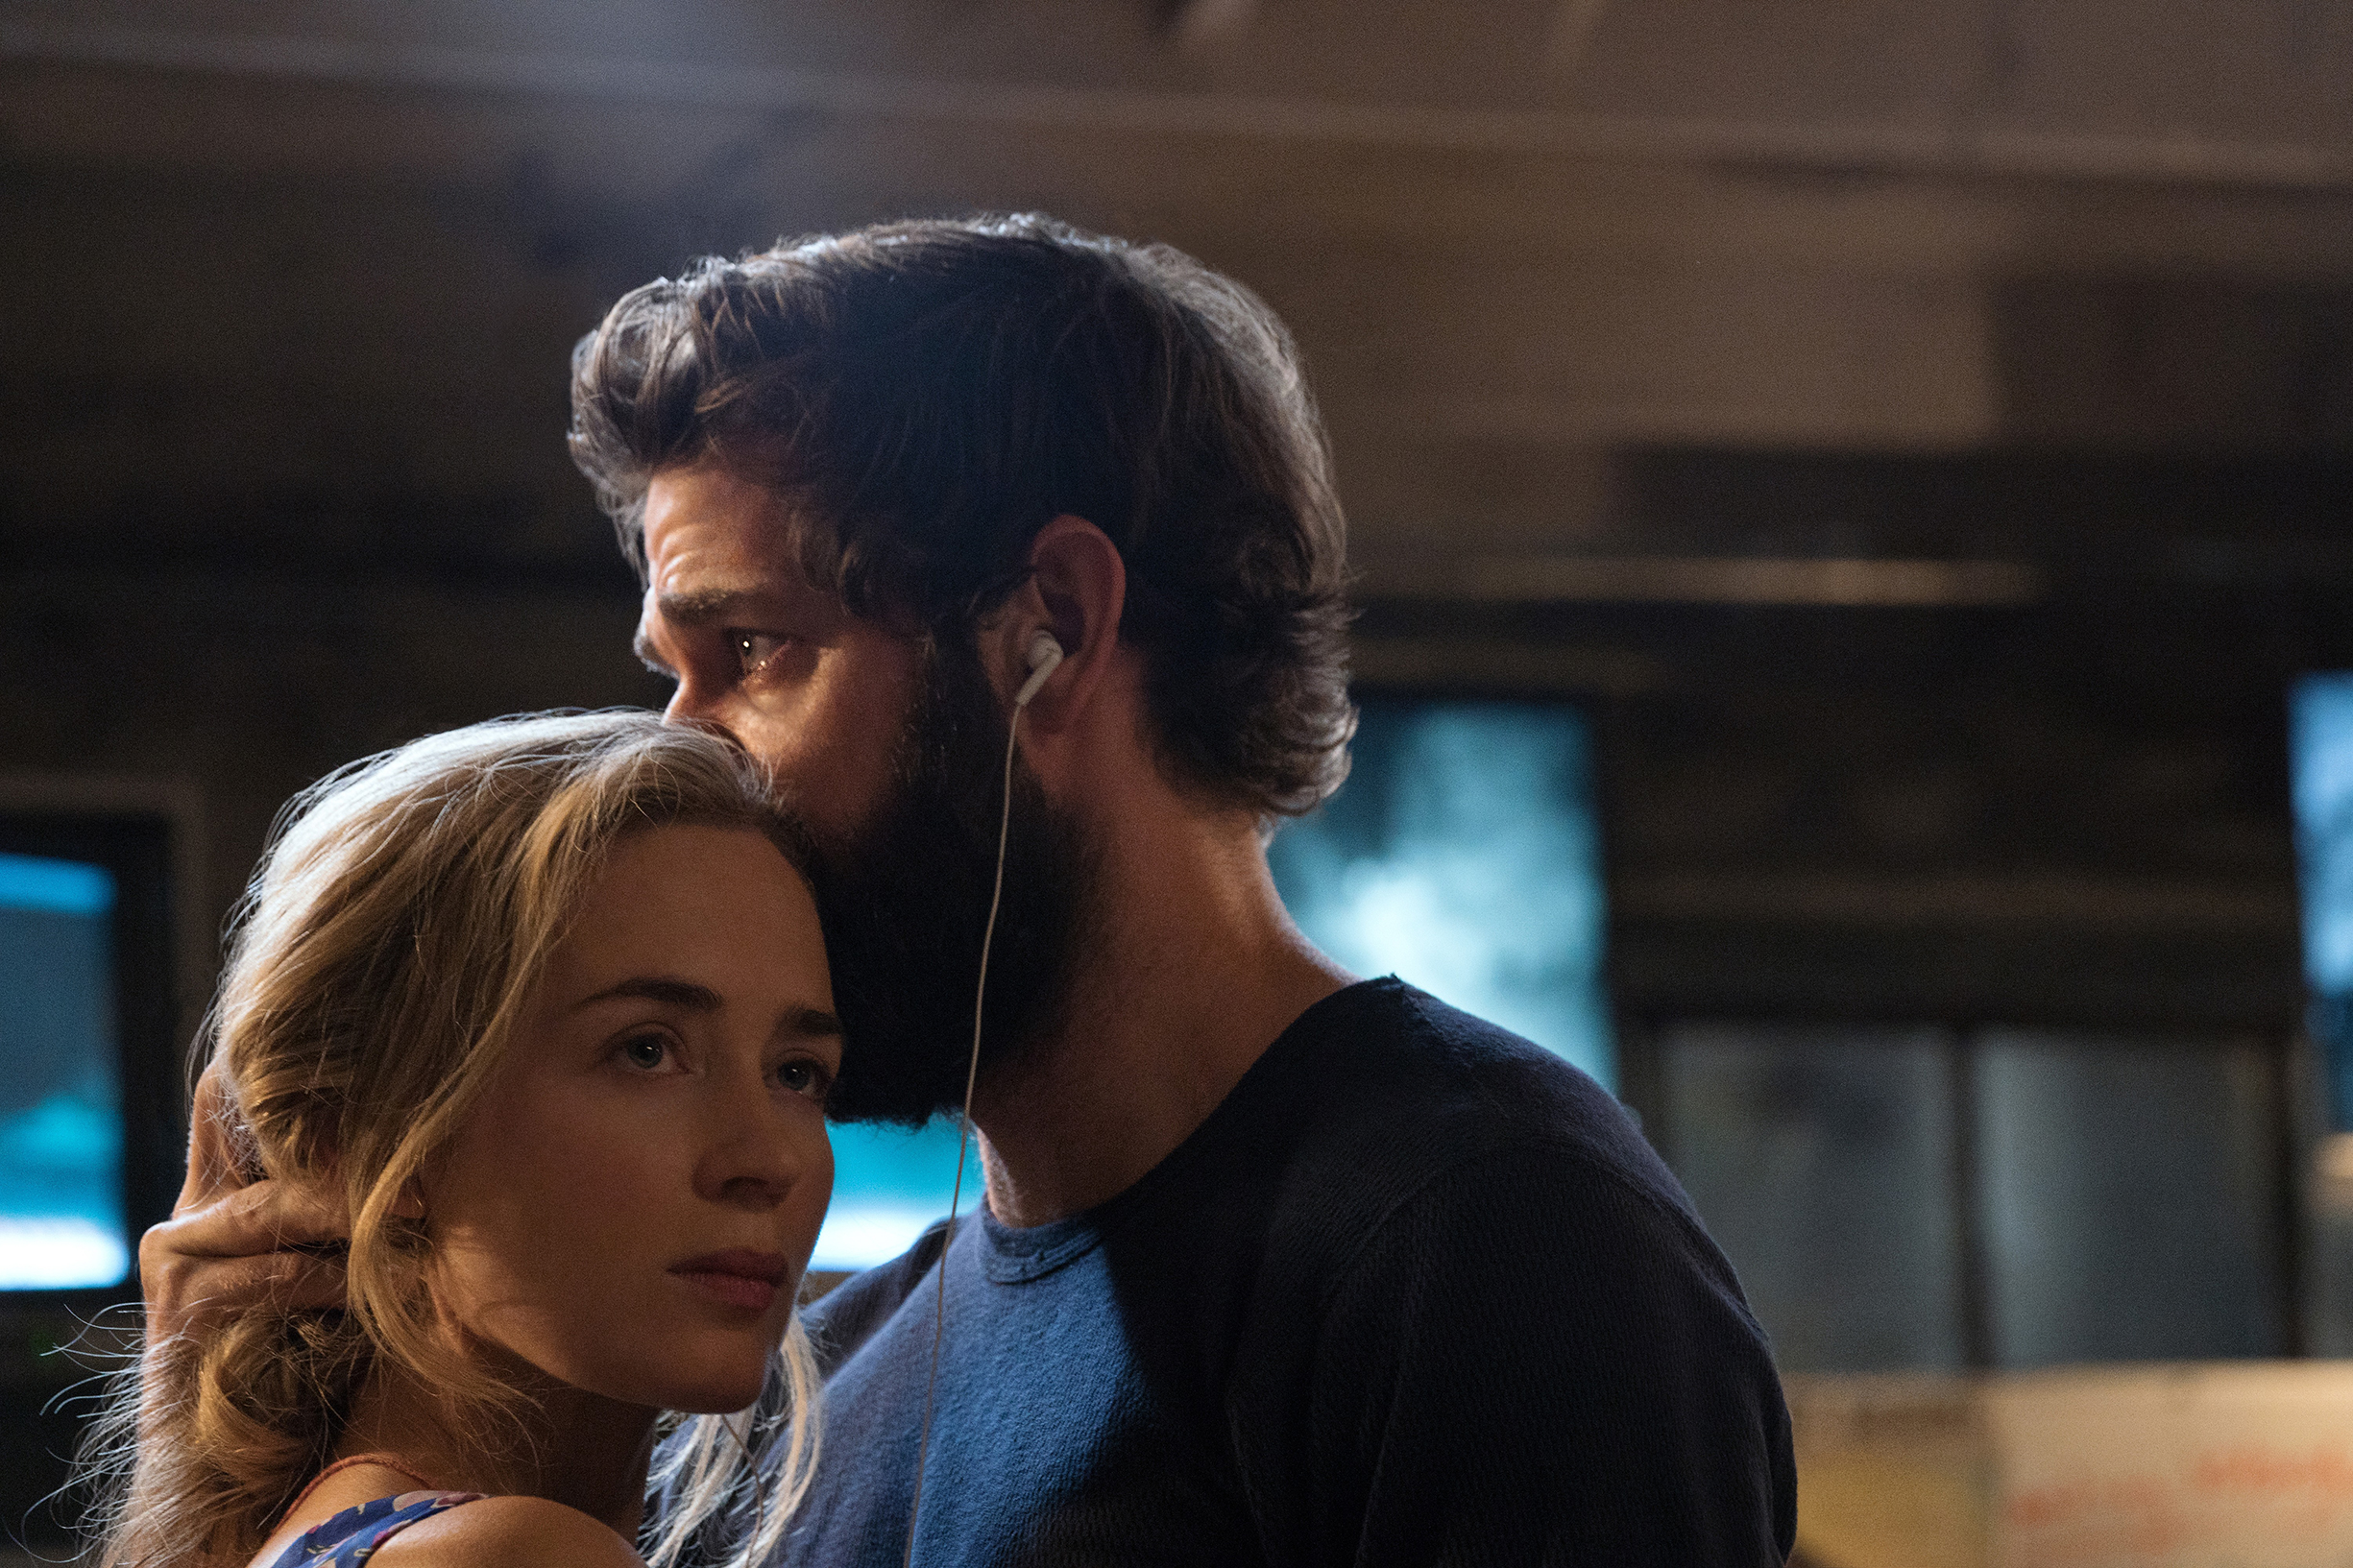 Emily Blunt and John Krasinski in 'A Quiet Place' (Paramount Pictures)